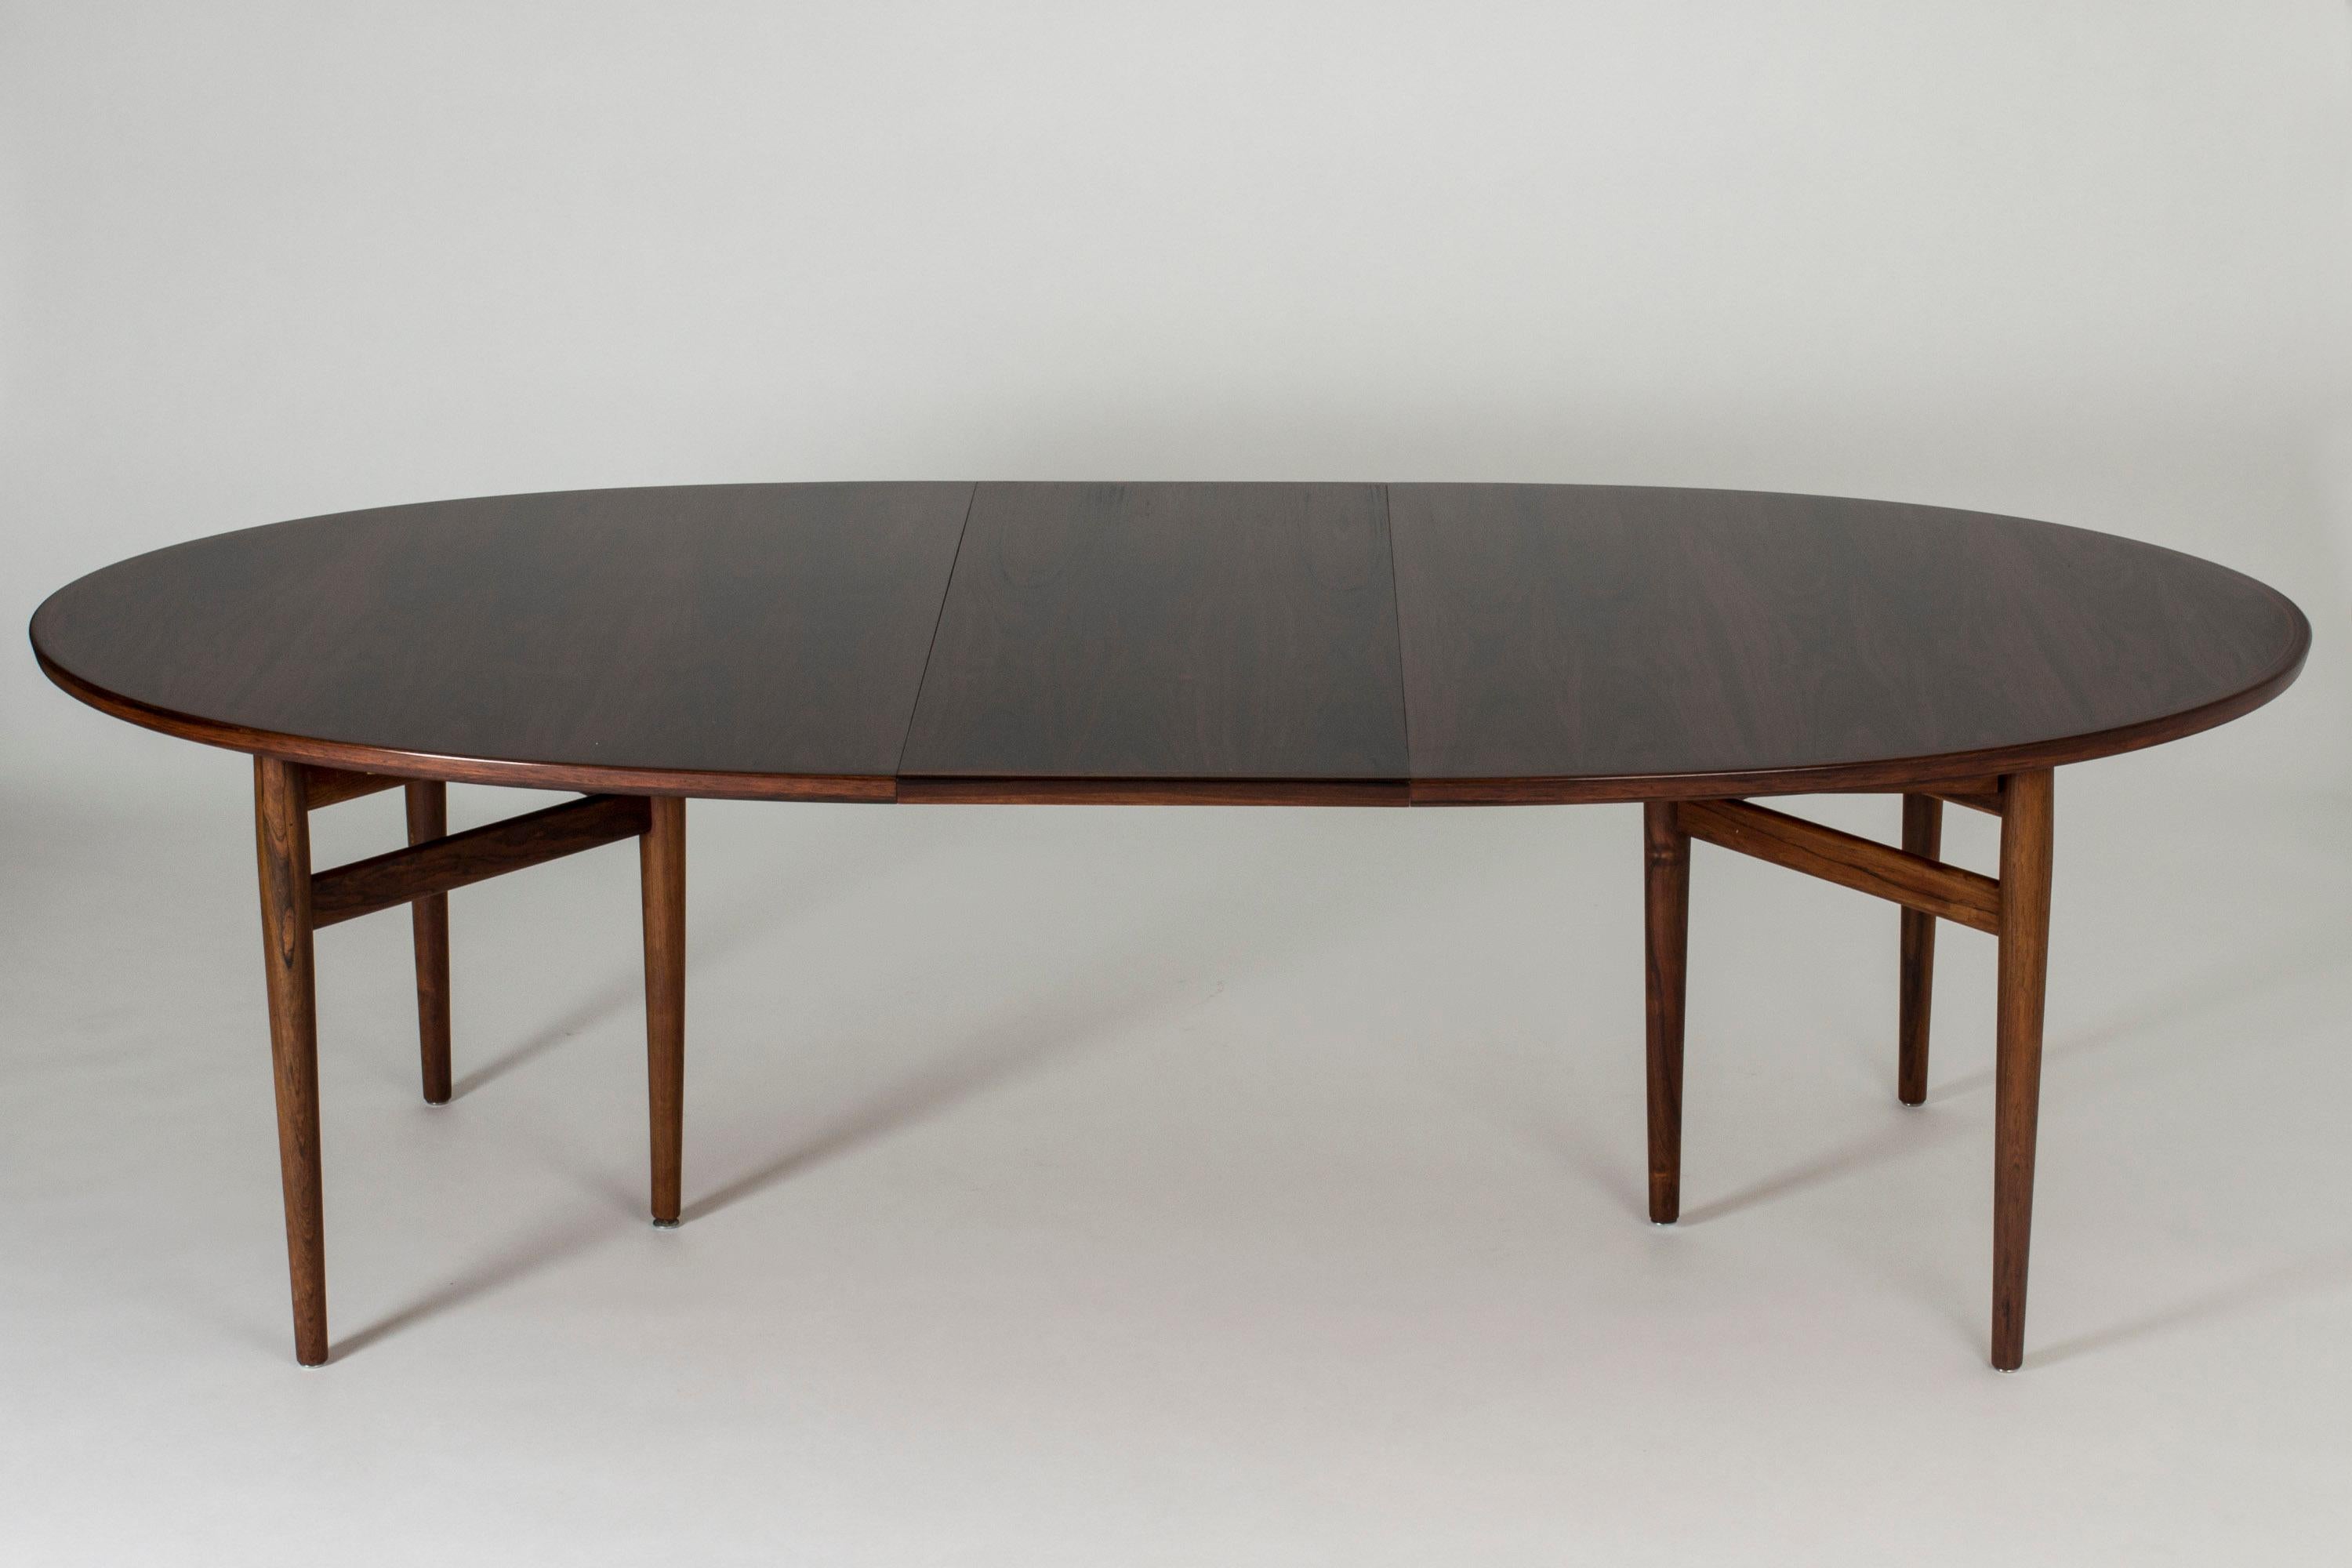 Scandinavian Modern Oval Dining Table with Extension Leaves by Arne Vodder